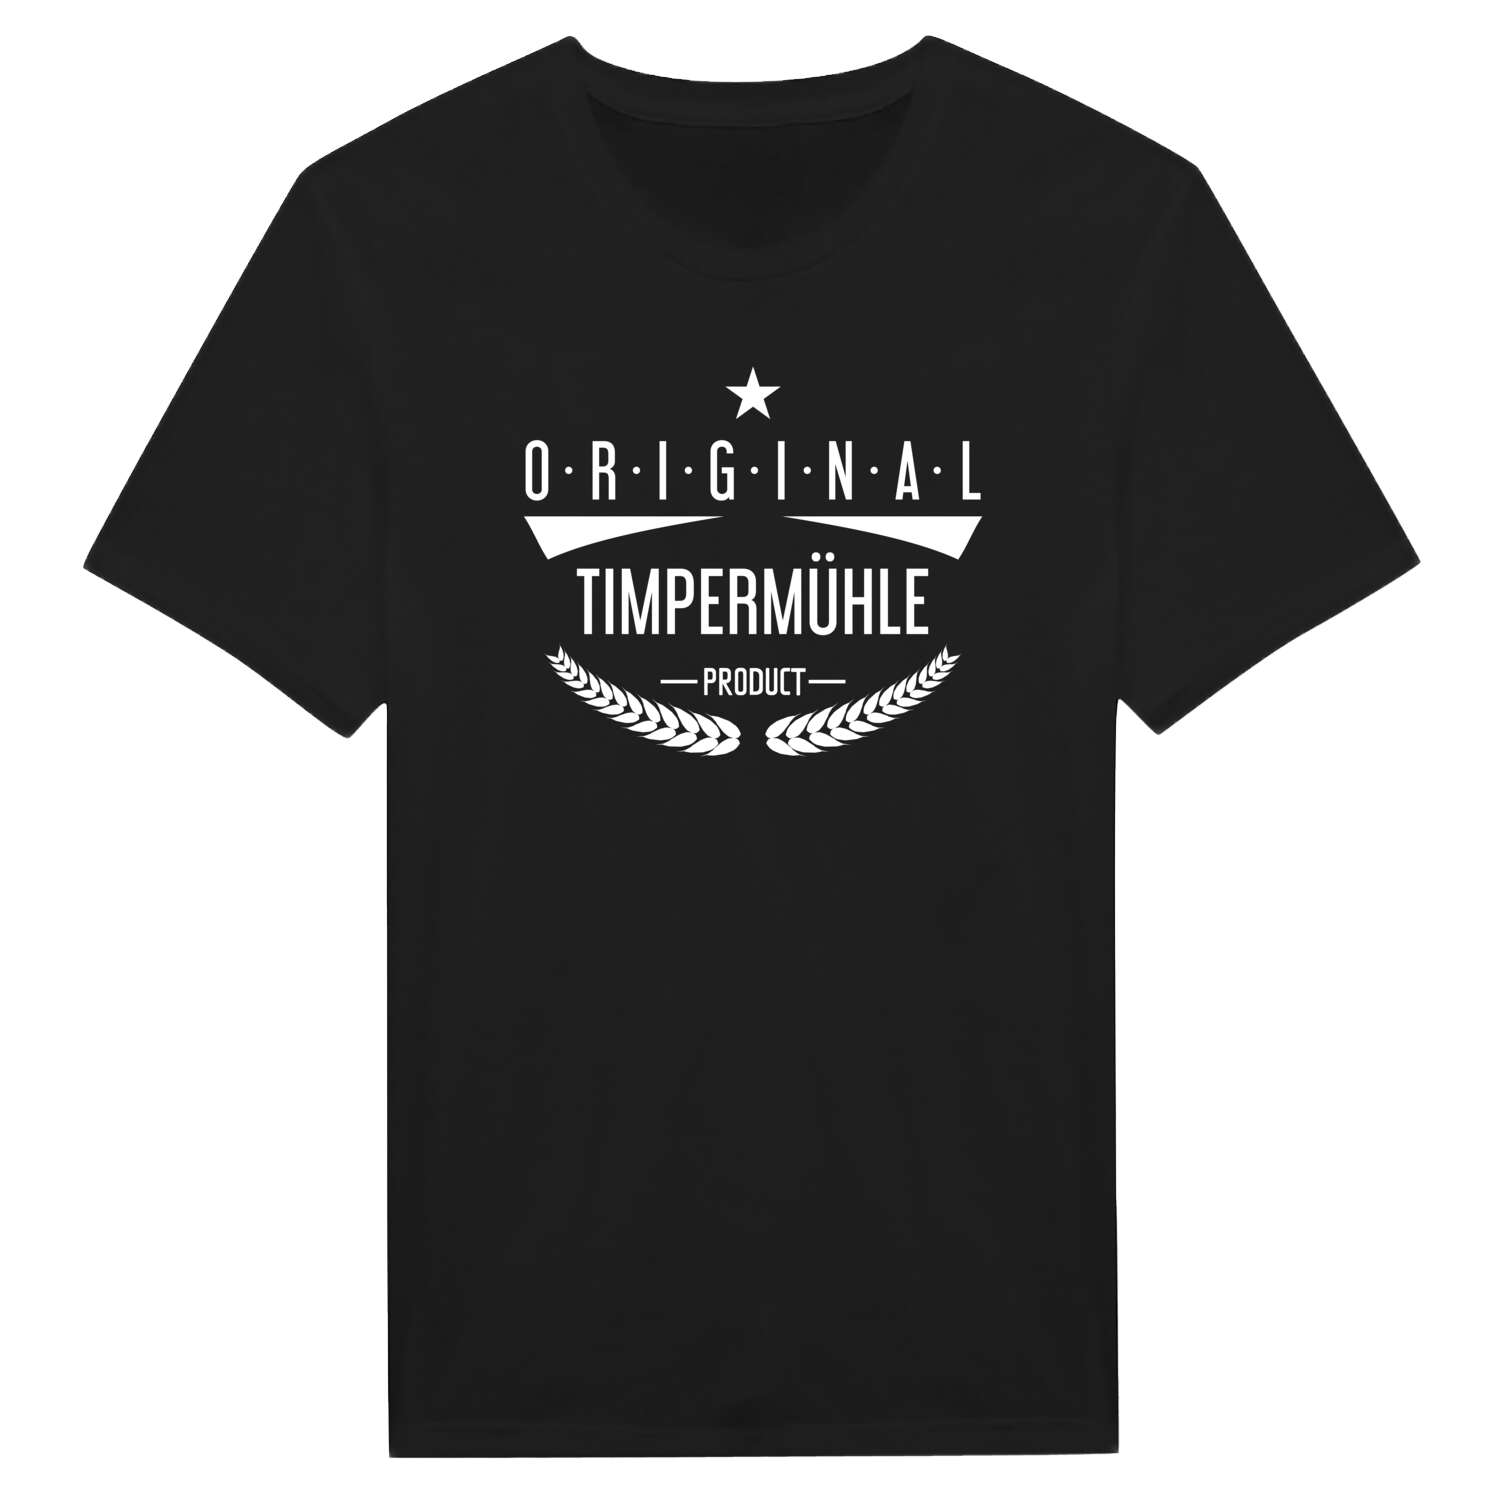 Timpermühle T-Shirt »Original Product«